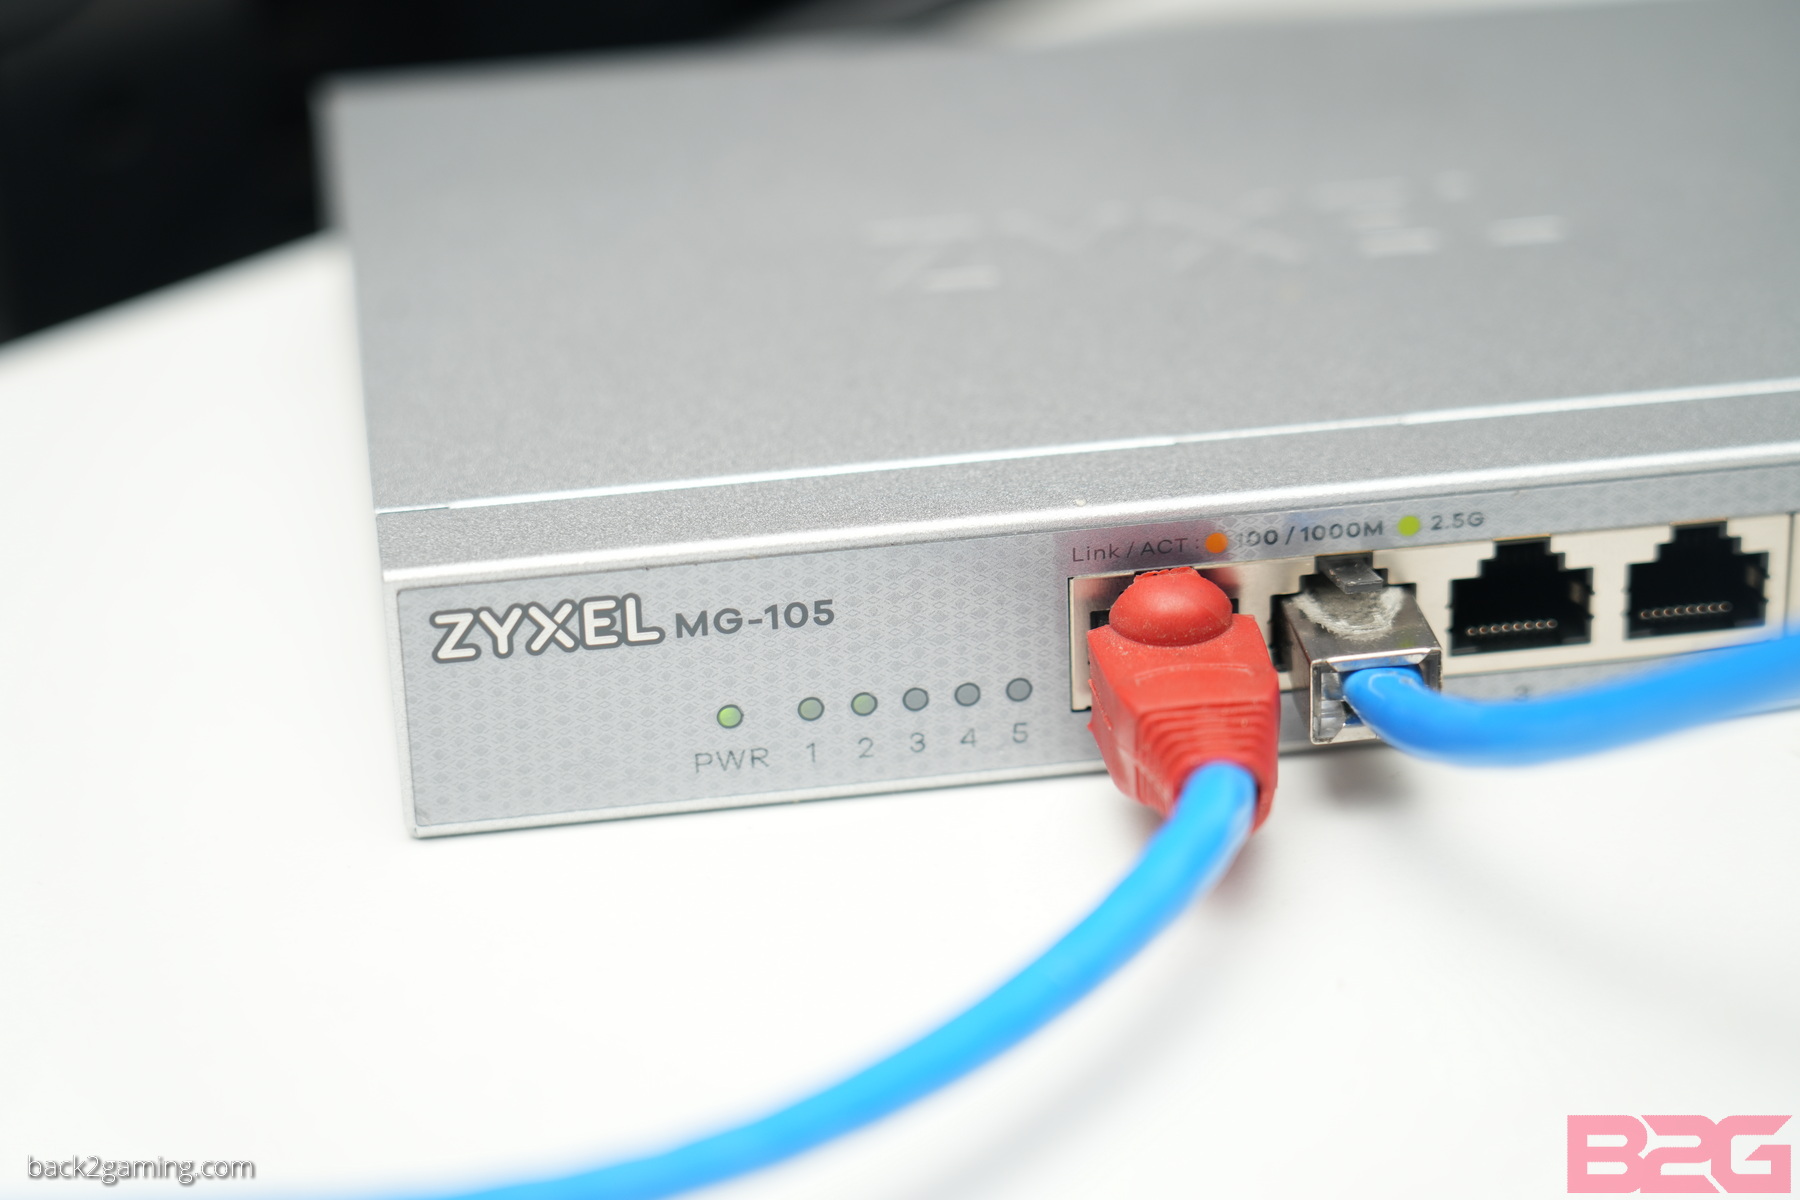 Zyxel Mg-105 2.5Gbe Network Switch Review